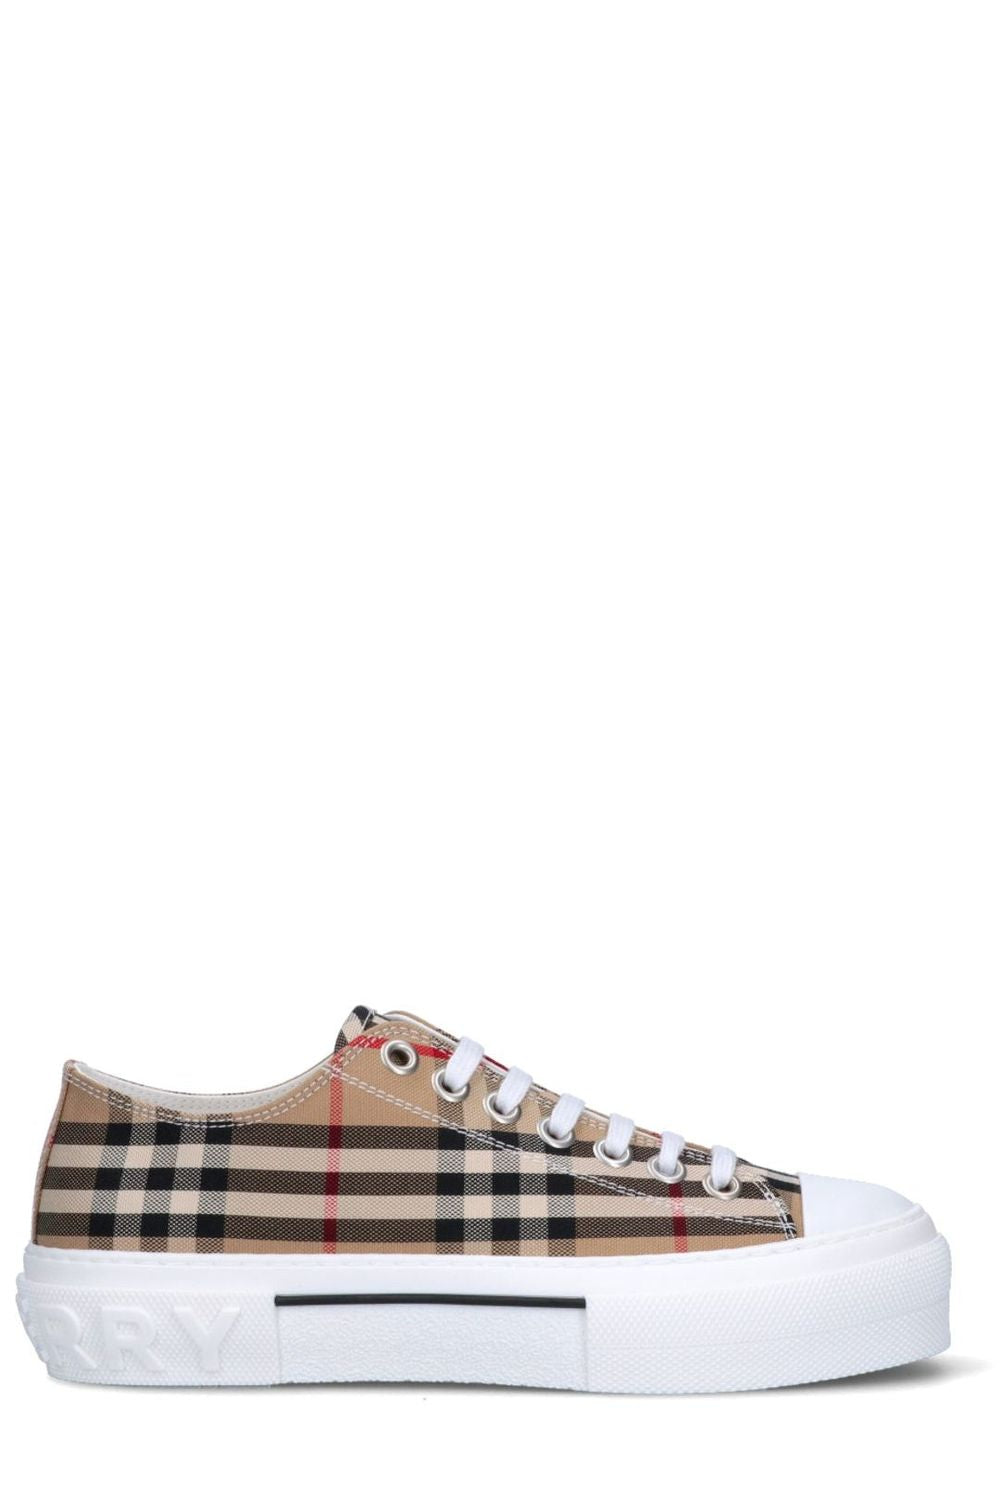 Authentic Burberry Ramsey Vintage Check Beige Low Top Sneakers Size US 8.5